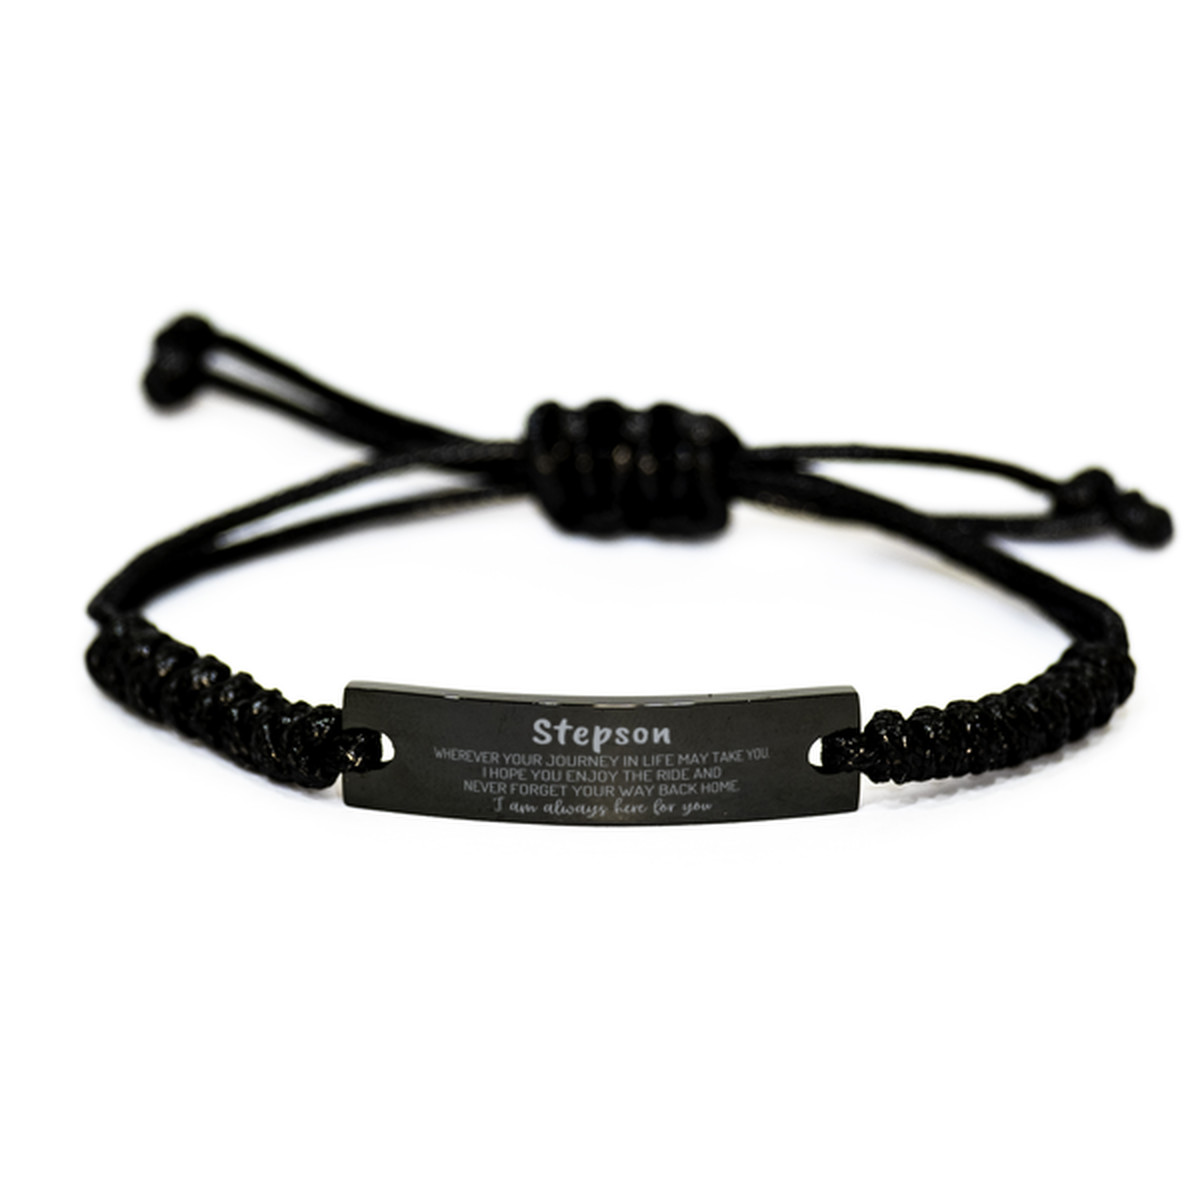 Stepson wherever your journey in life may take you, I am always here for you Stepson Black Rope Bracelet, Awesome Christmas Gifts For Stepson, Stepson Birthday Gifts for Men Women Family Loved One